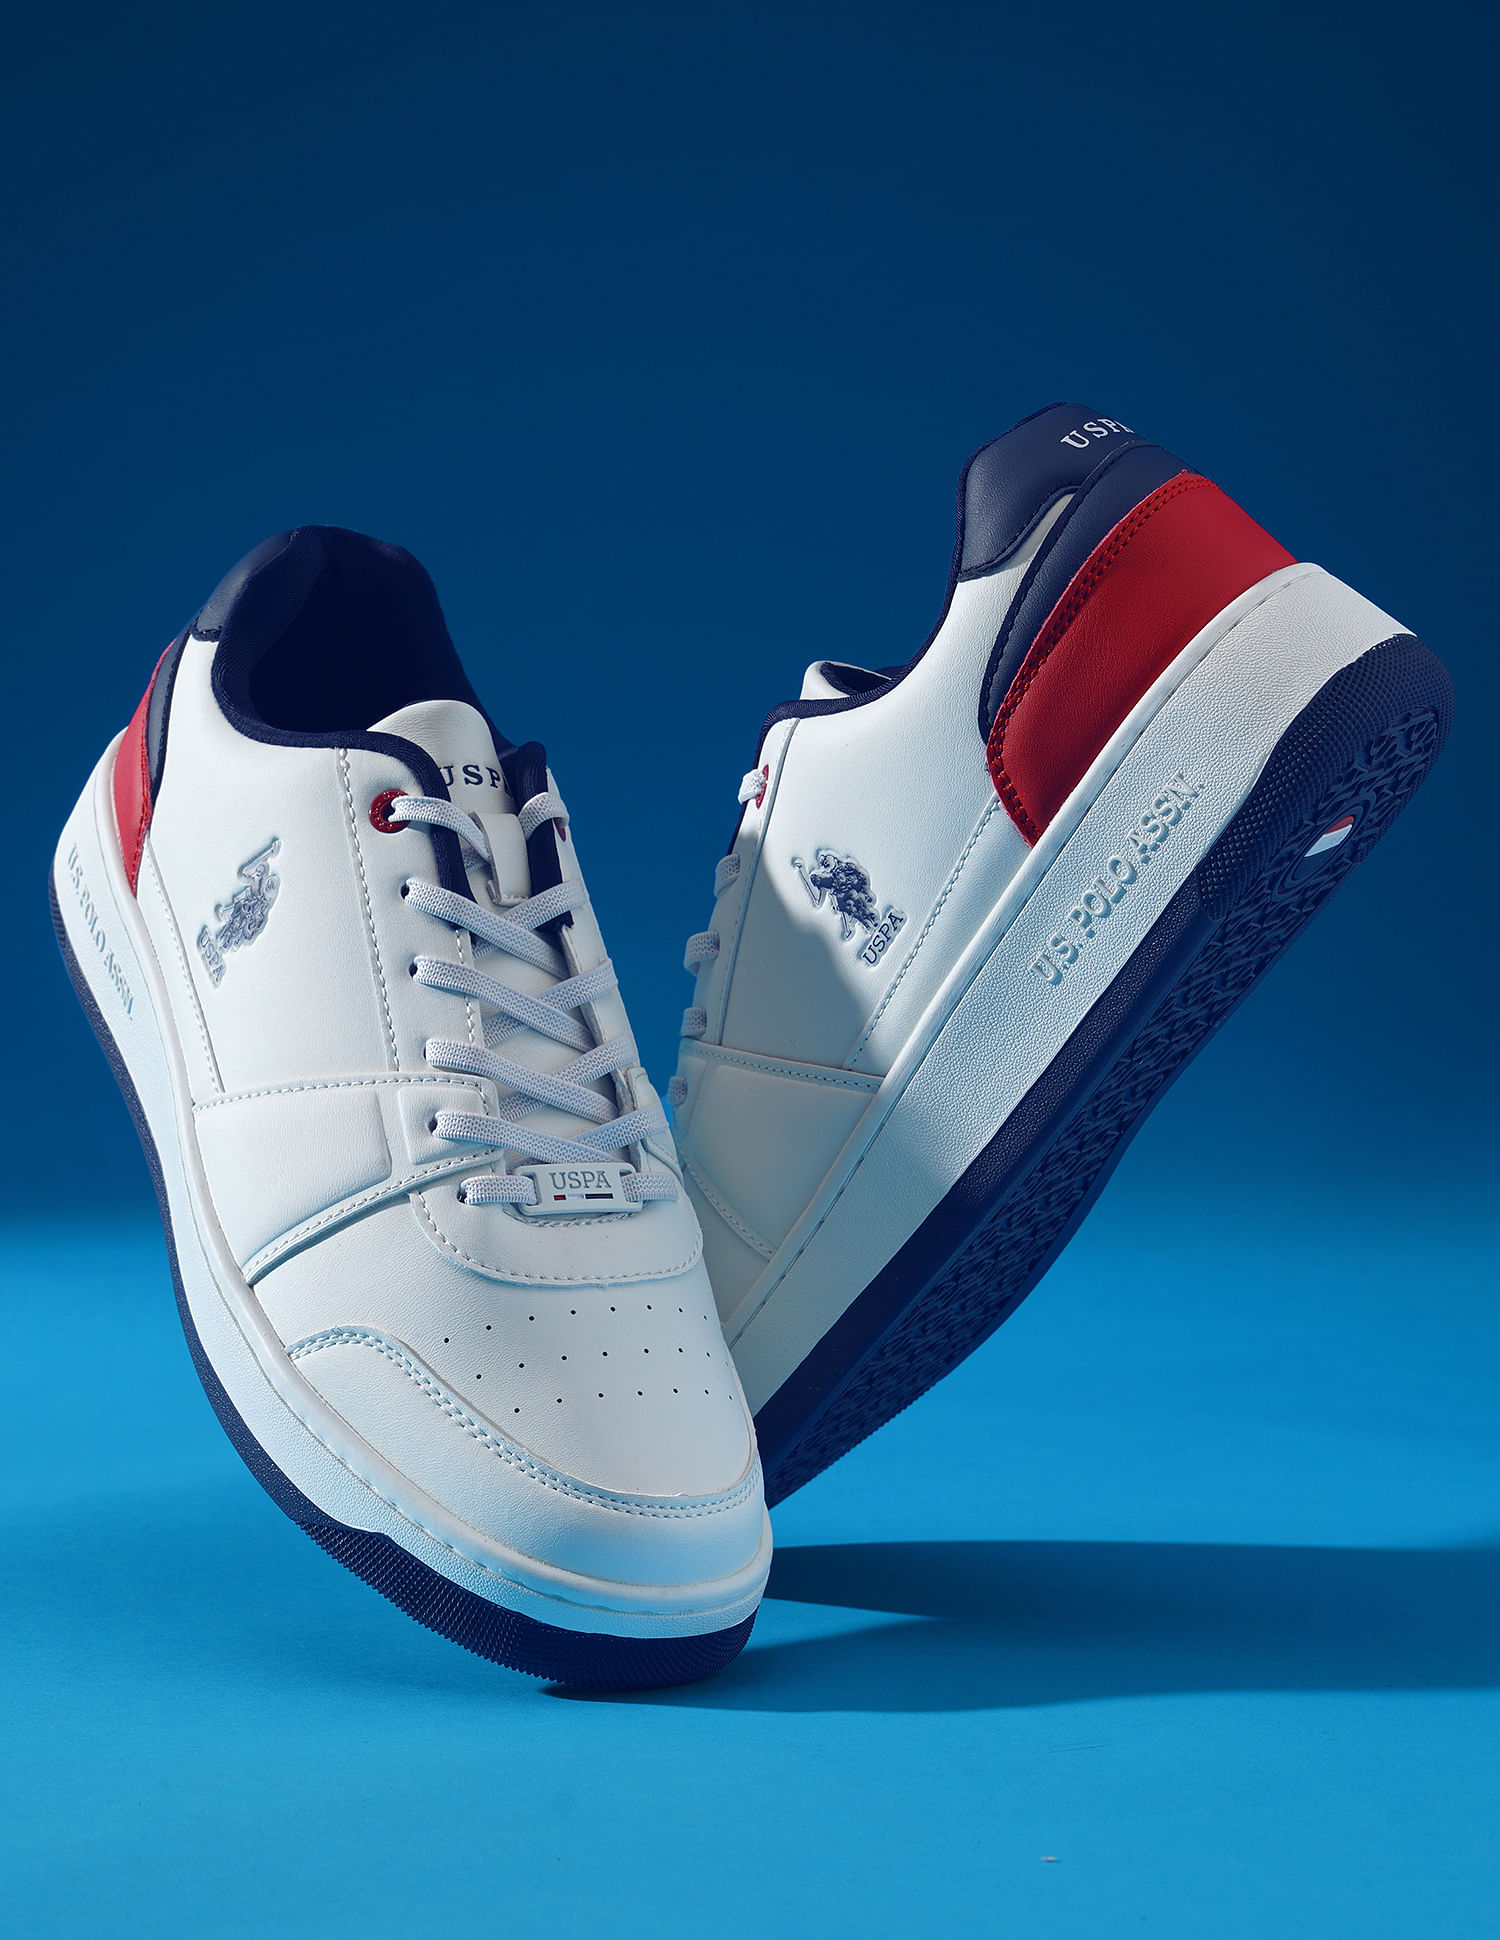 U.S POLO ASSN. - KRIS003-WHI - White / Navy / Red - Sneakers | Mens \ U.S. Polo  Assn. | Kicks Sport - a trusted supplier of branded sports footwear